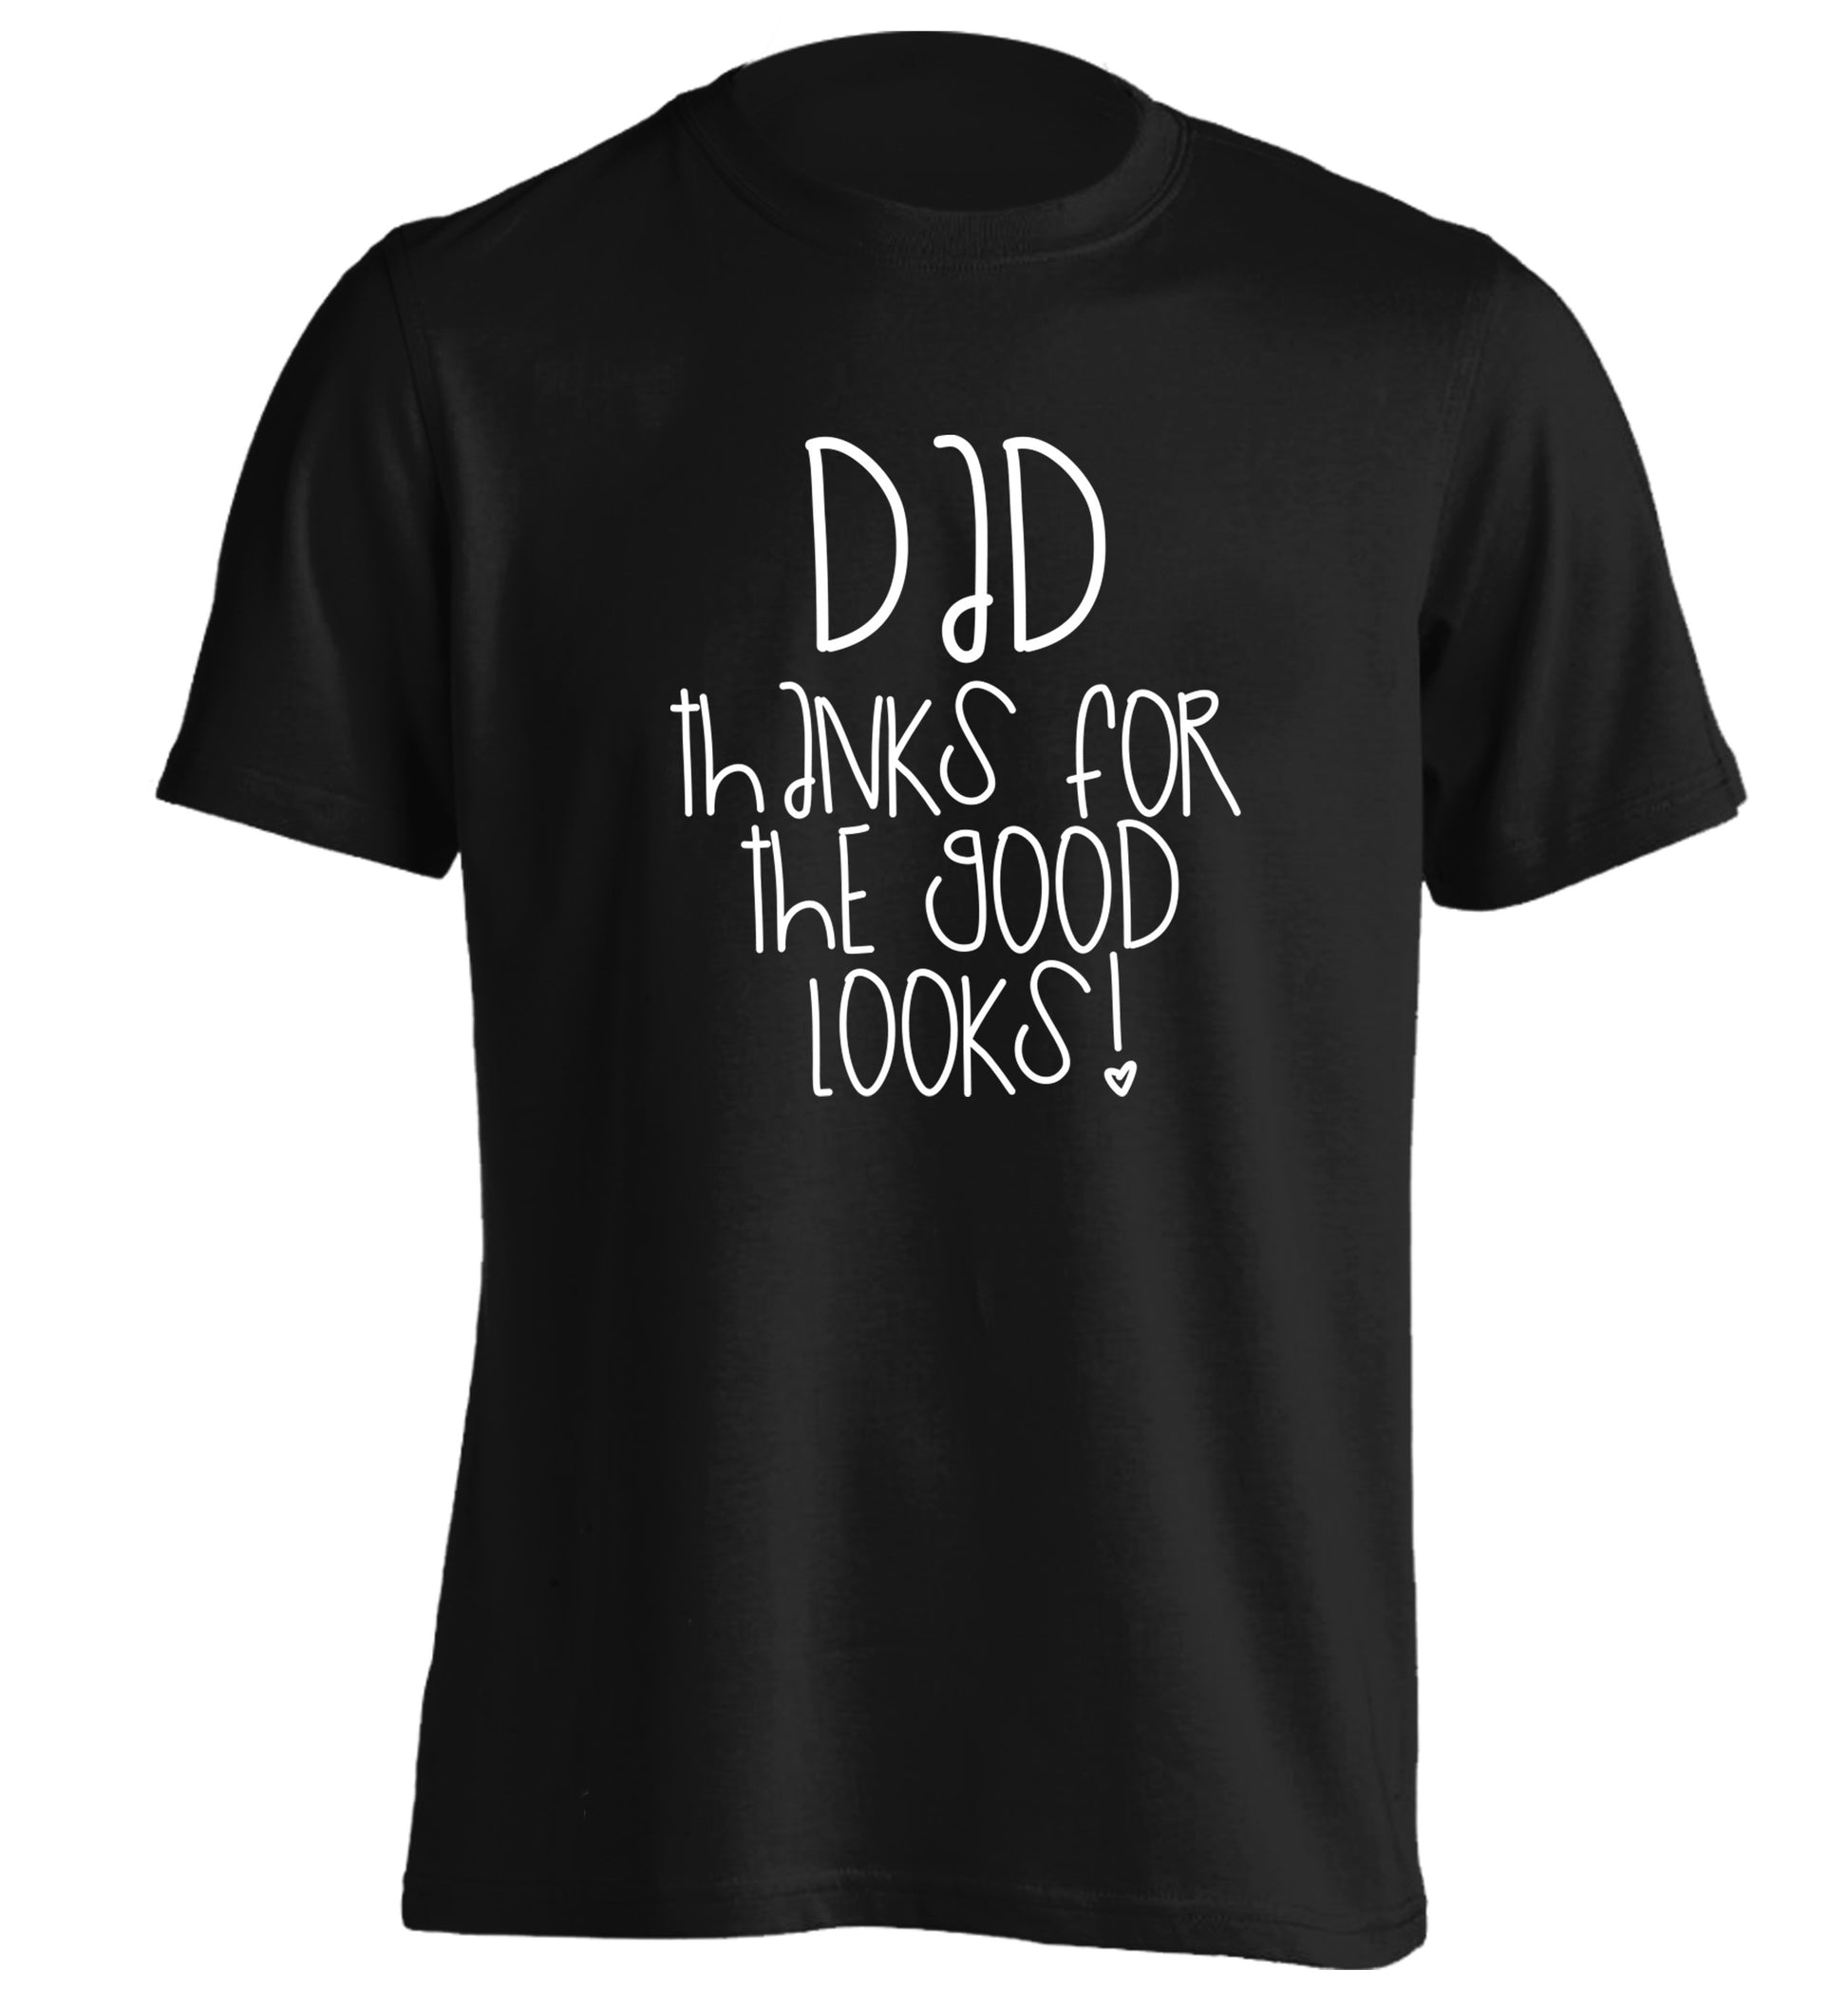 Dad thanks for the good looks adults unisex black Tshirt 2XL